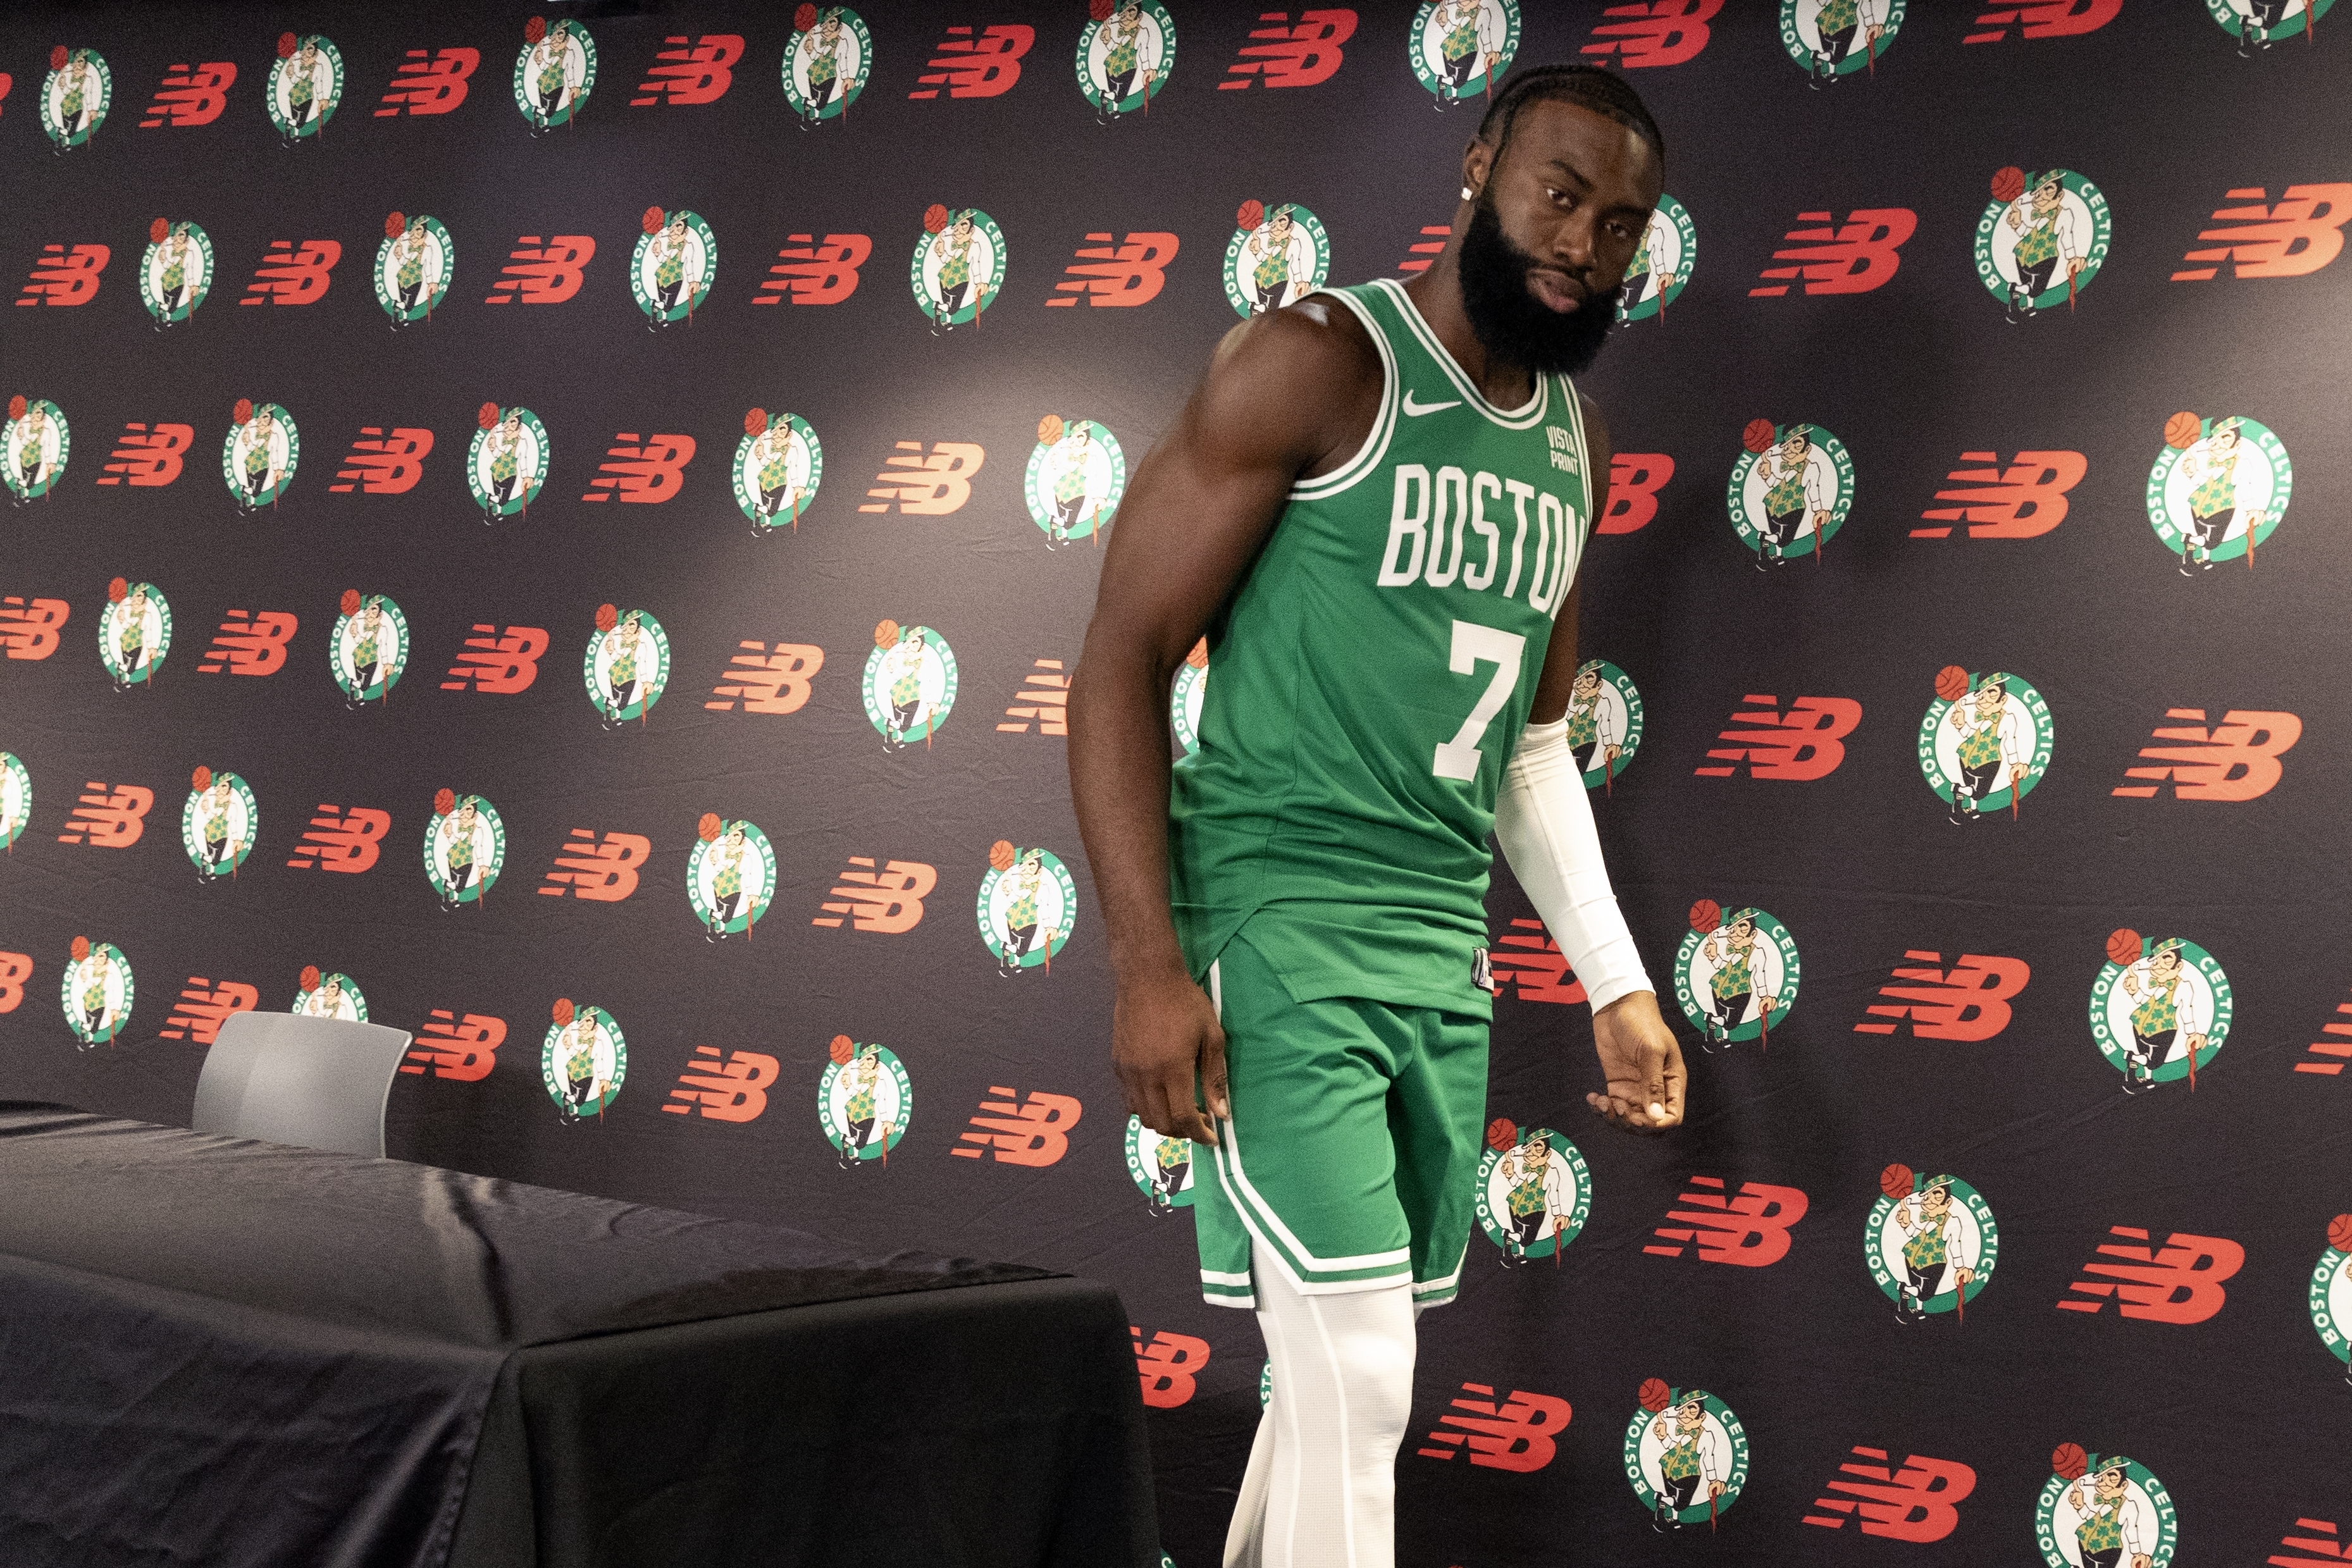 New rest rules don't bother NBA players, including Jaylen Brown